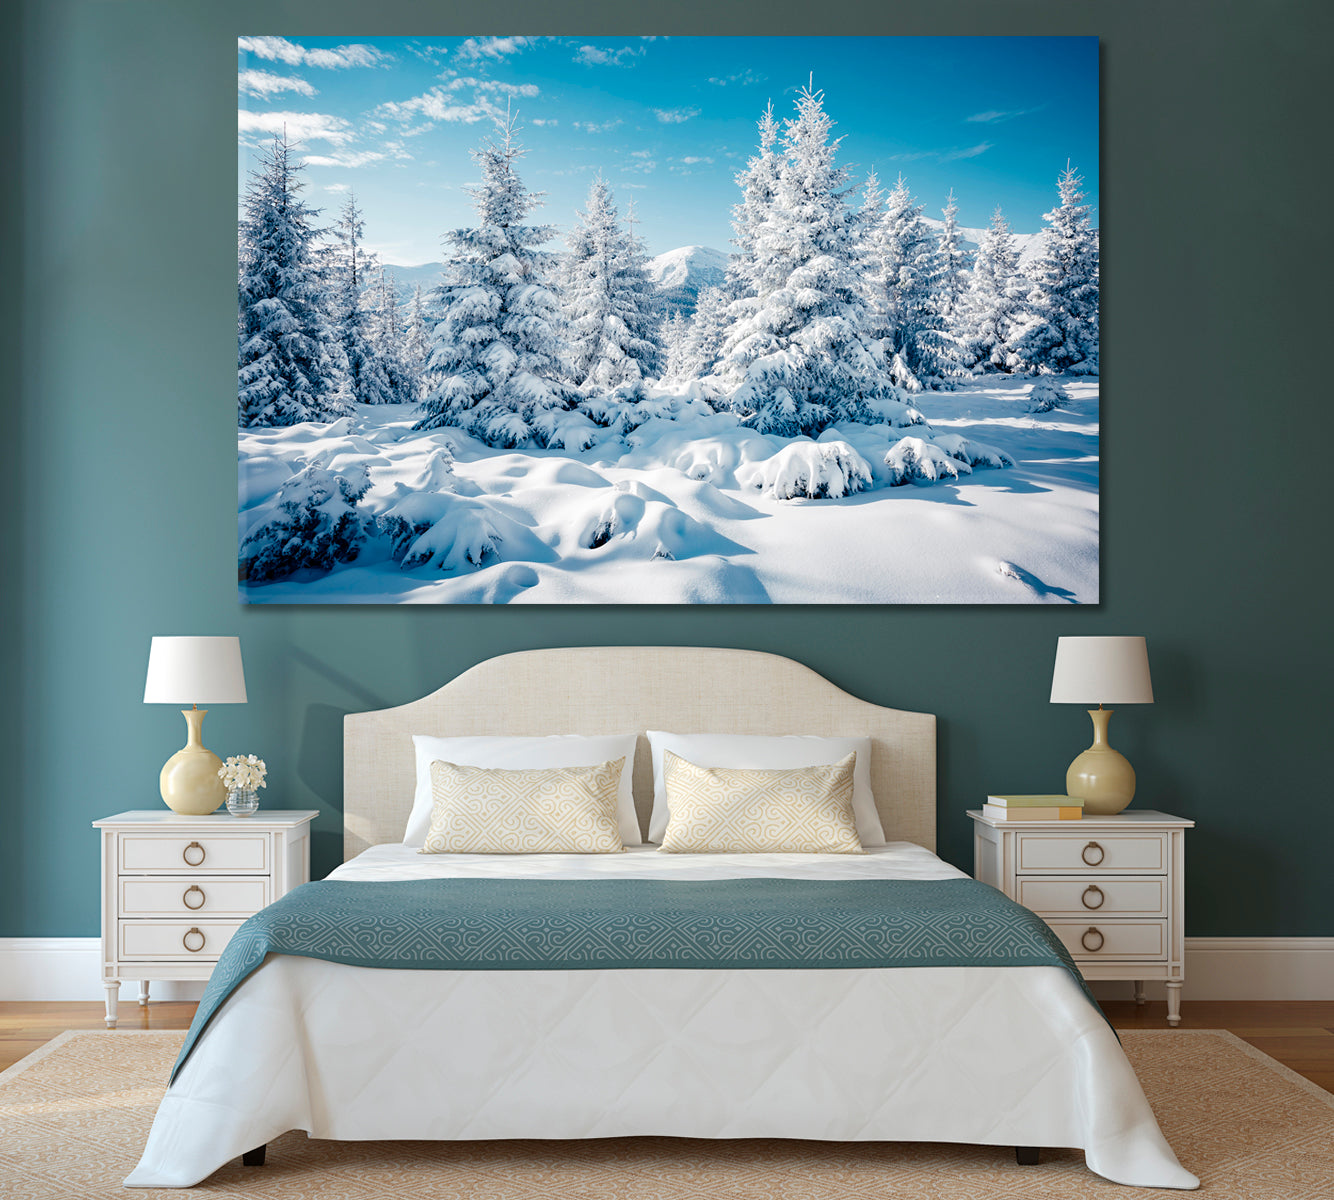 Snowy Spruce Forest in the Mountains Canvas Print-Canvas Print-CetArt-1 Panel-24x16 inches-CetArt